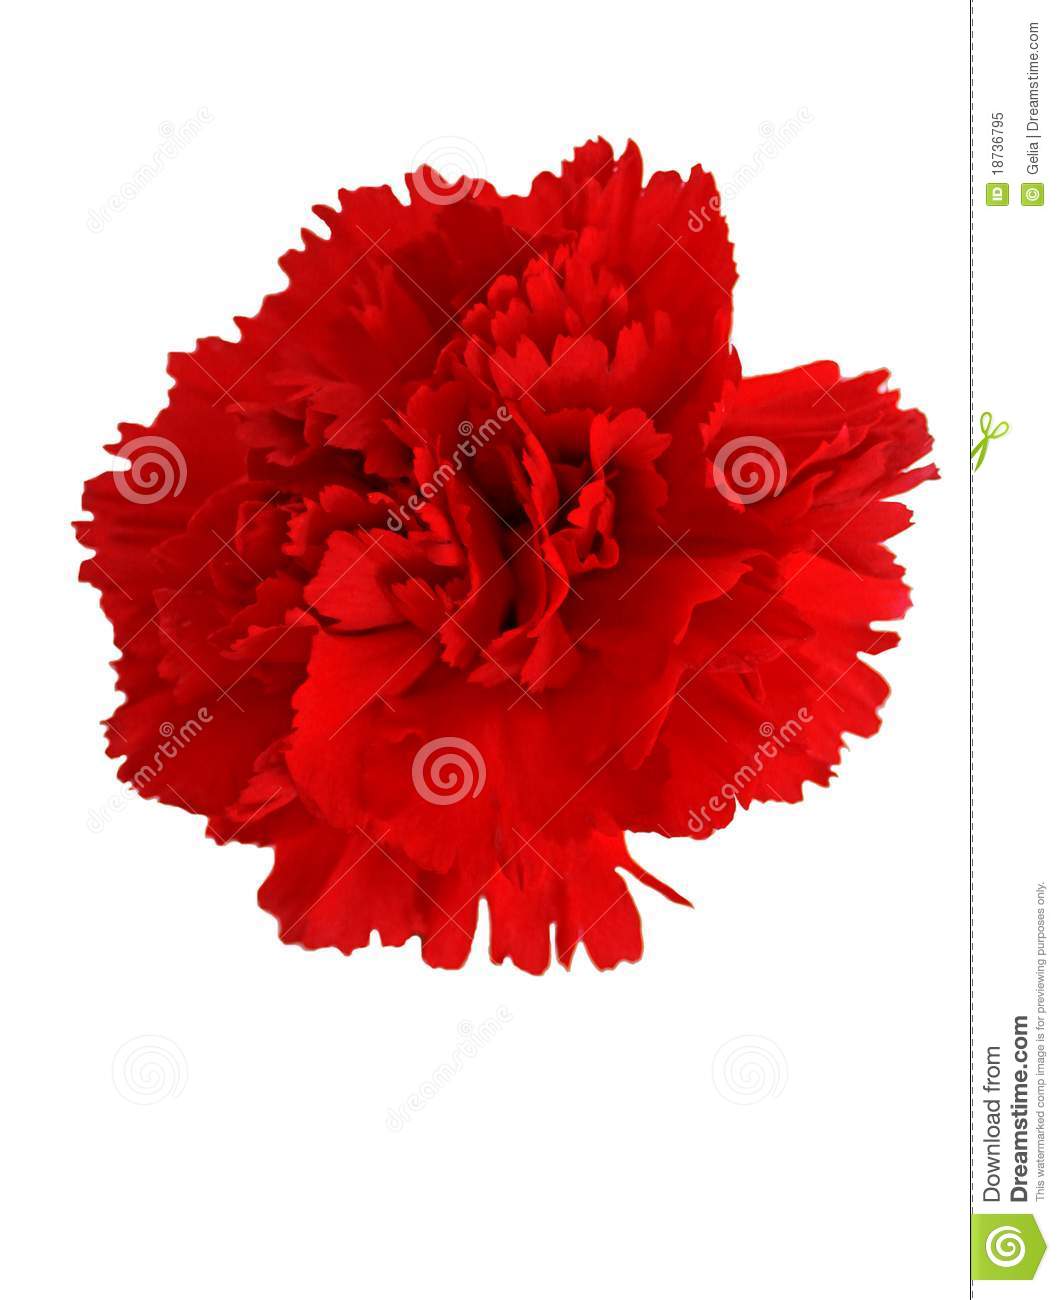 Red Carnation Royalty Free Stock Photo   Image  18736795